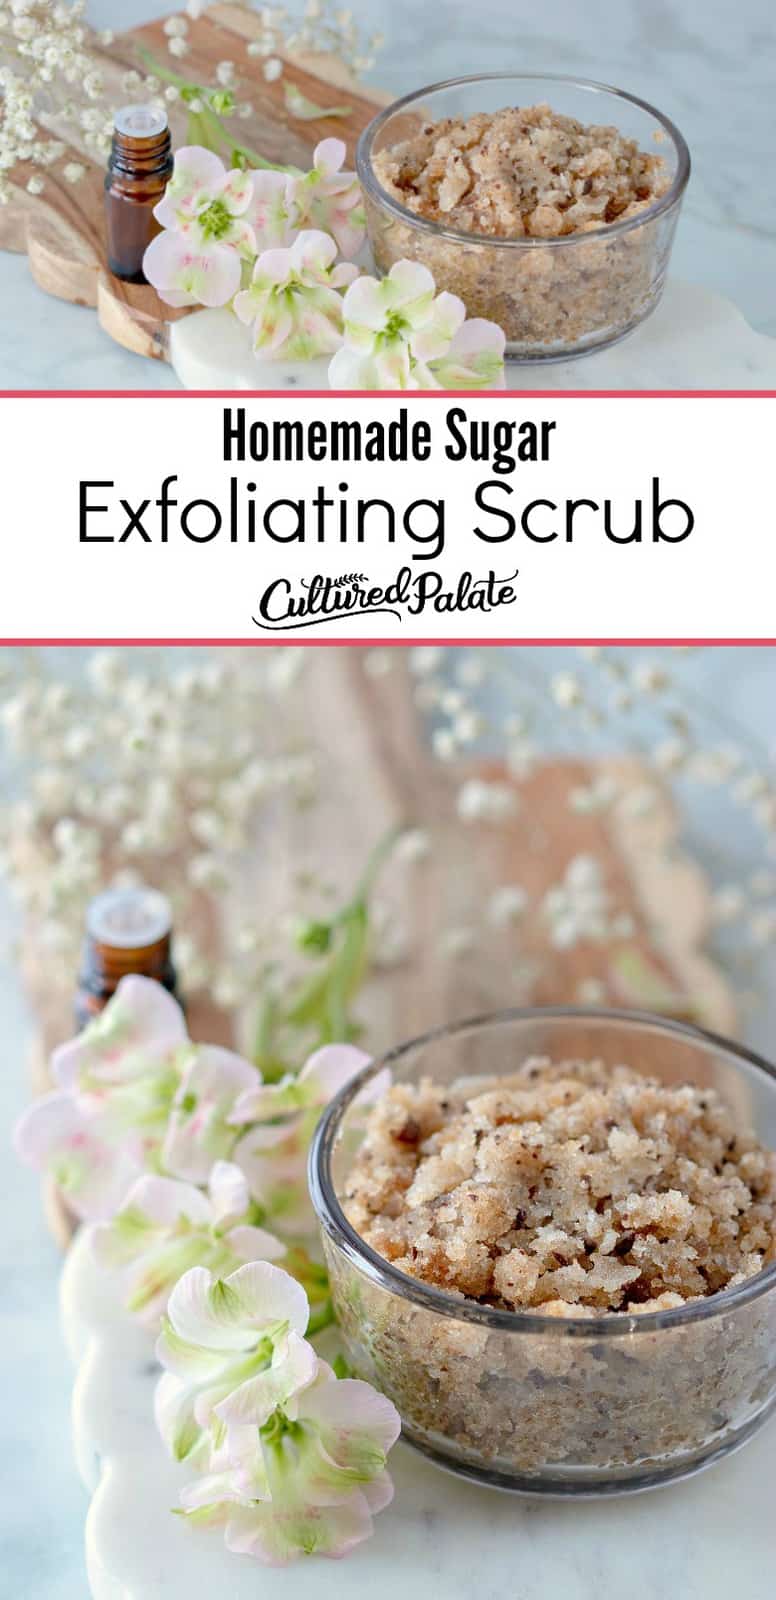 Homemade Sugar Exfoliating Scrub shown in two images close up and head on with text overlay.